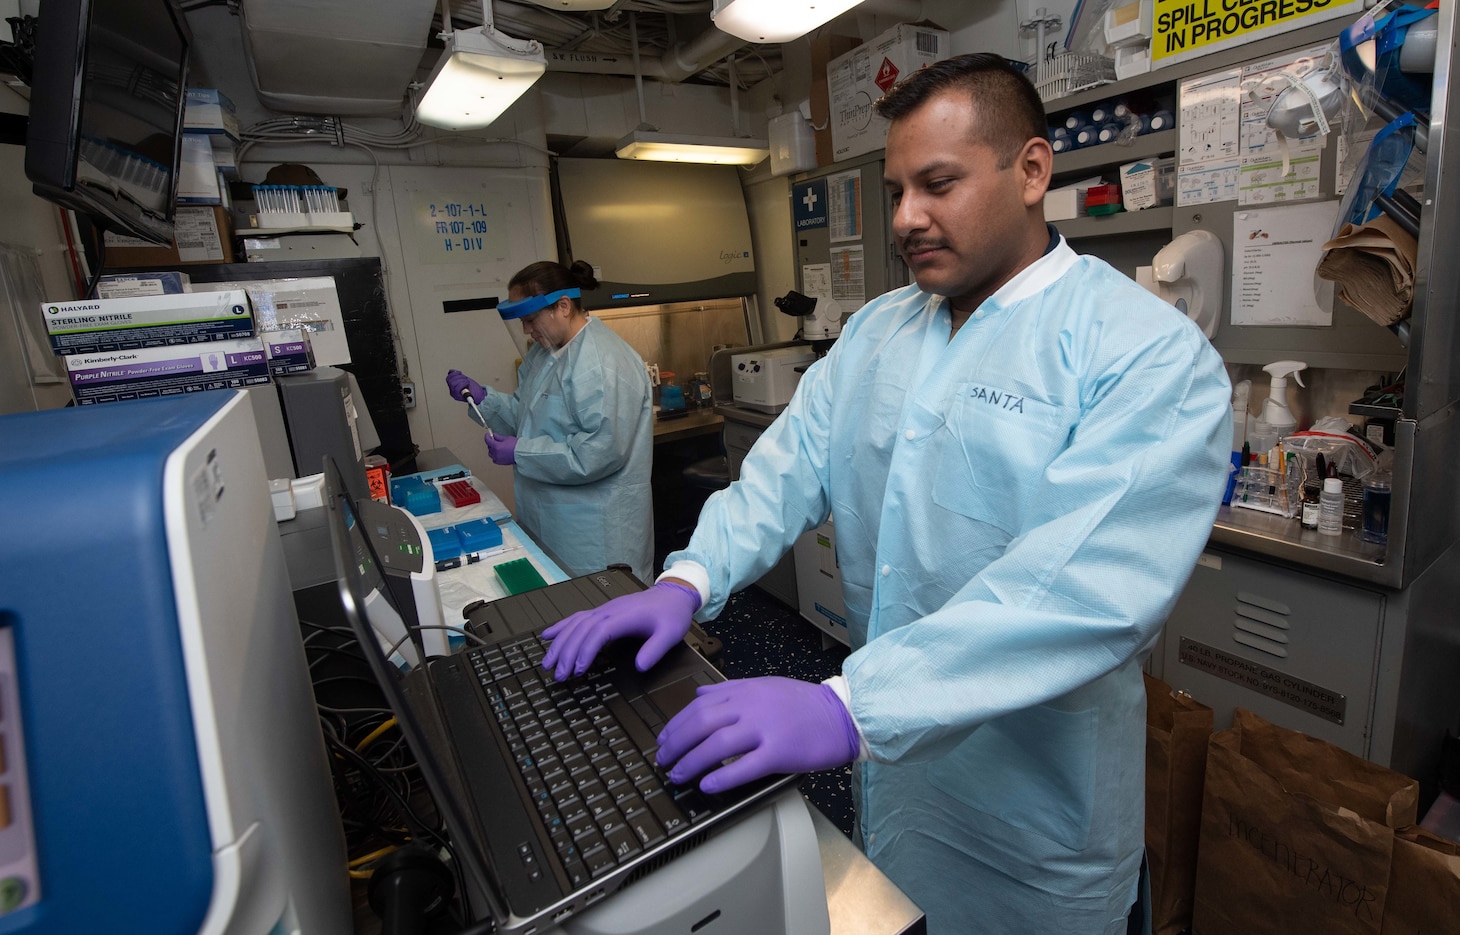 PHILIPPINE SEA (March 19, 2020) Hospital Corpsman 1st Class Ernesto Santa Ana, right, and Hospital Corpsman 2nd Class Maria F. Potts-Szoke, work in Naval Medical Research Center's mobile laboratory aboard the aircraft carrier USS Theodore Roosevelt (CVN 71) March 19, 2020. The Theodore Roosevelt Carrier Strike Group is on a scheduled deployment to the Indo-Pacific.